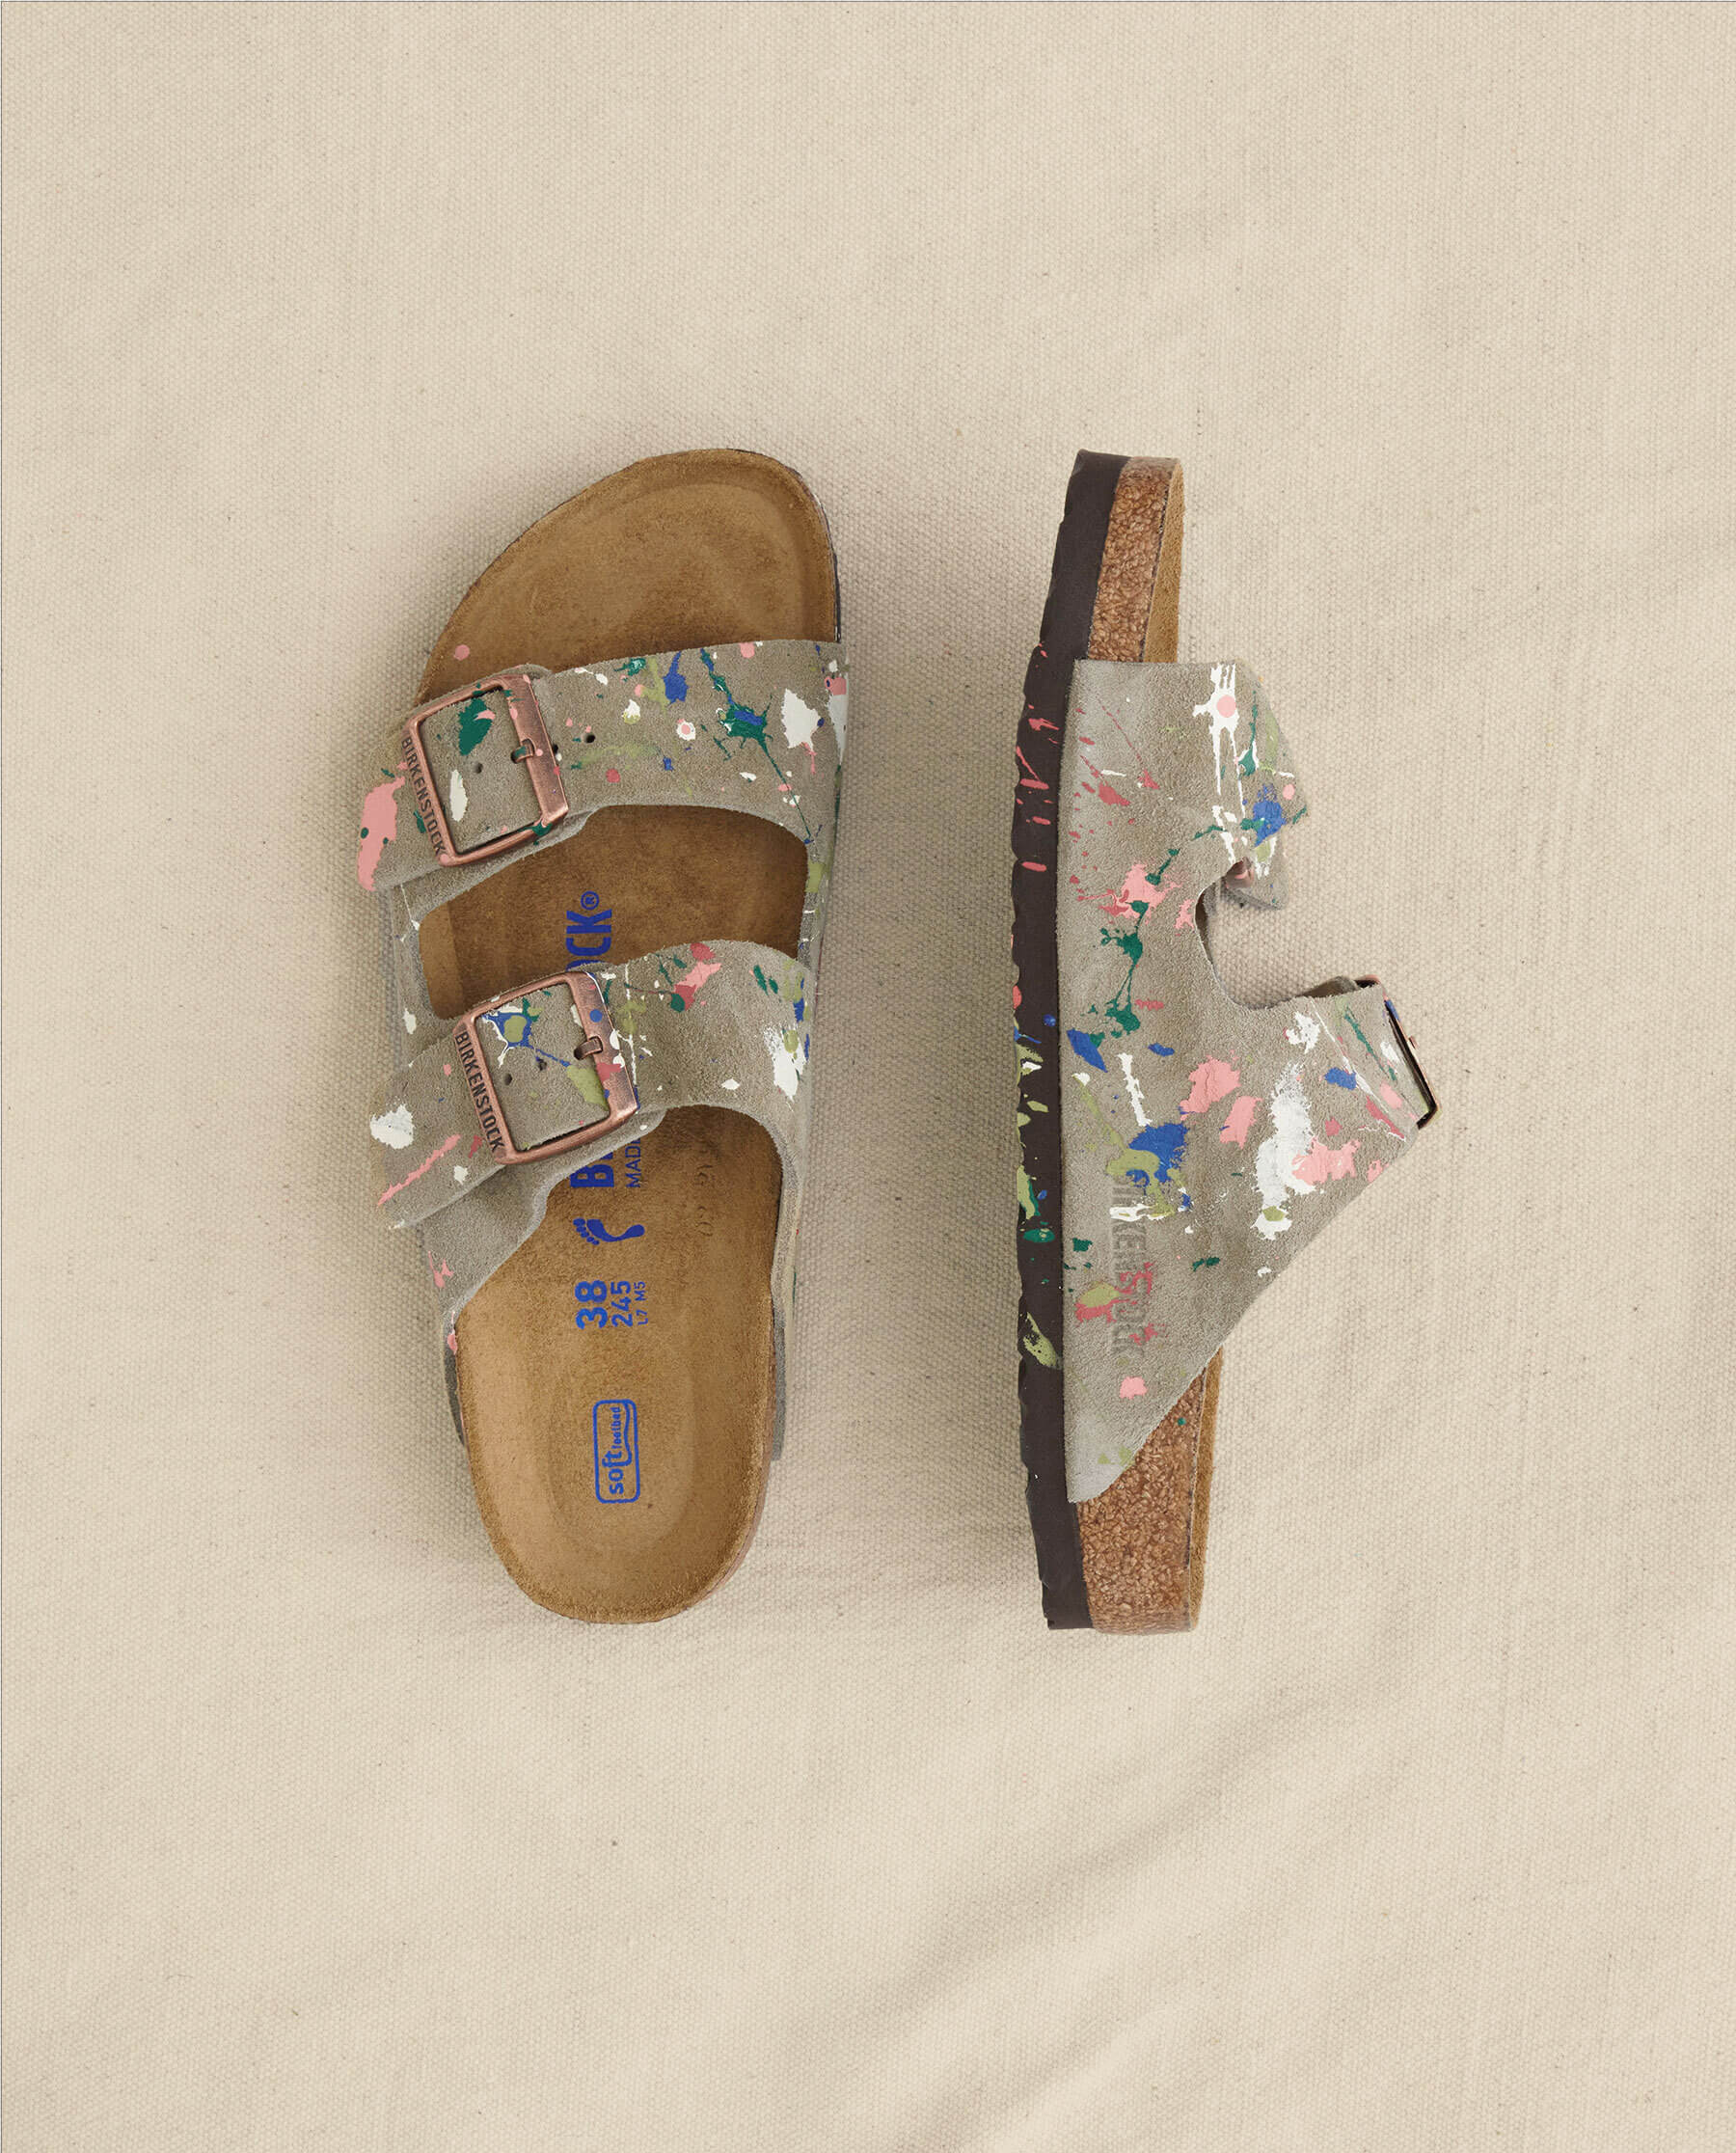 Arizona Taupe Birkenstock with Paint. -- Taupe with Bright Multi Paint SHOE THE GREAT. HOL 23 BIRKENSTOCK